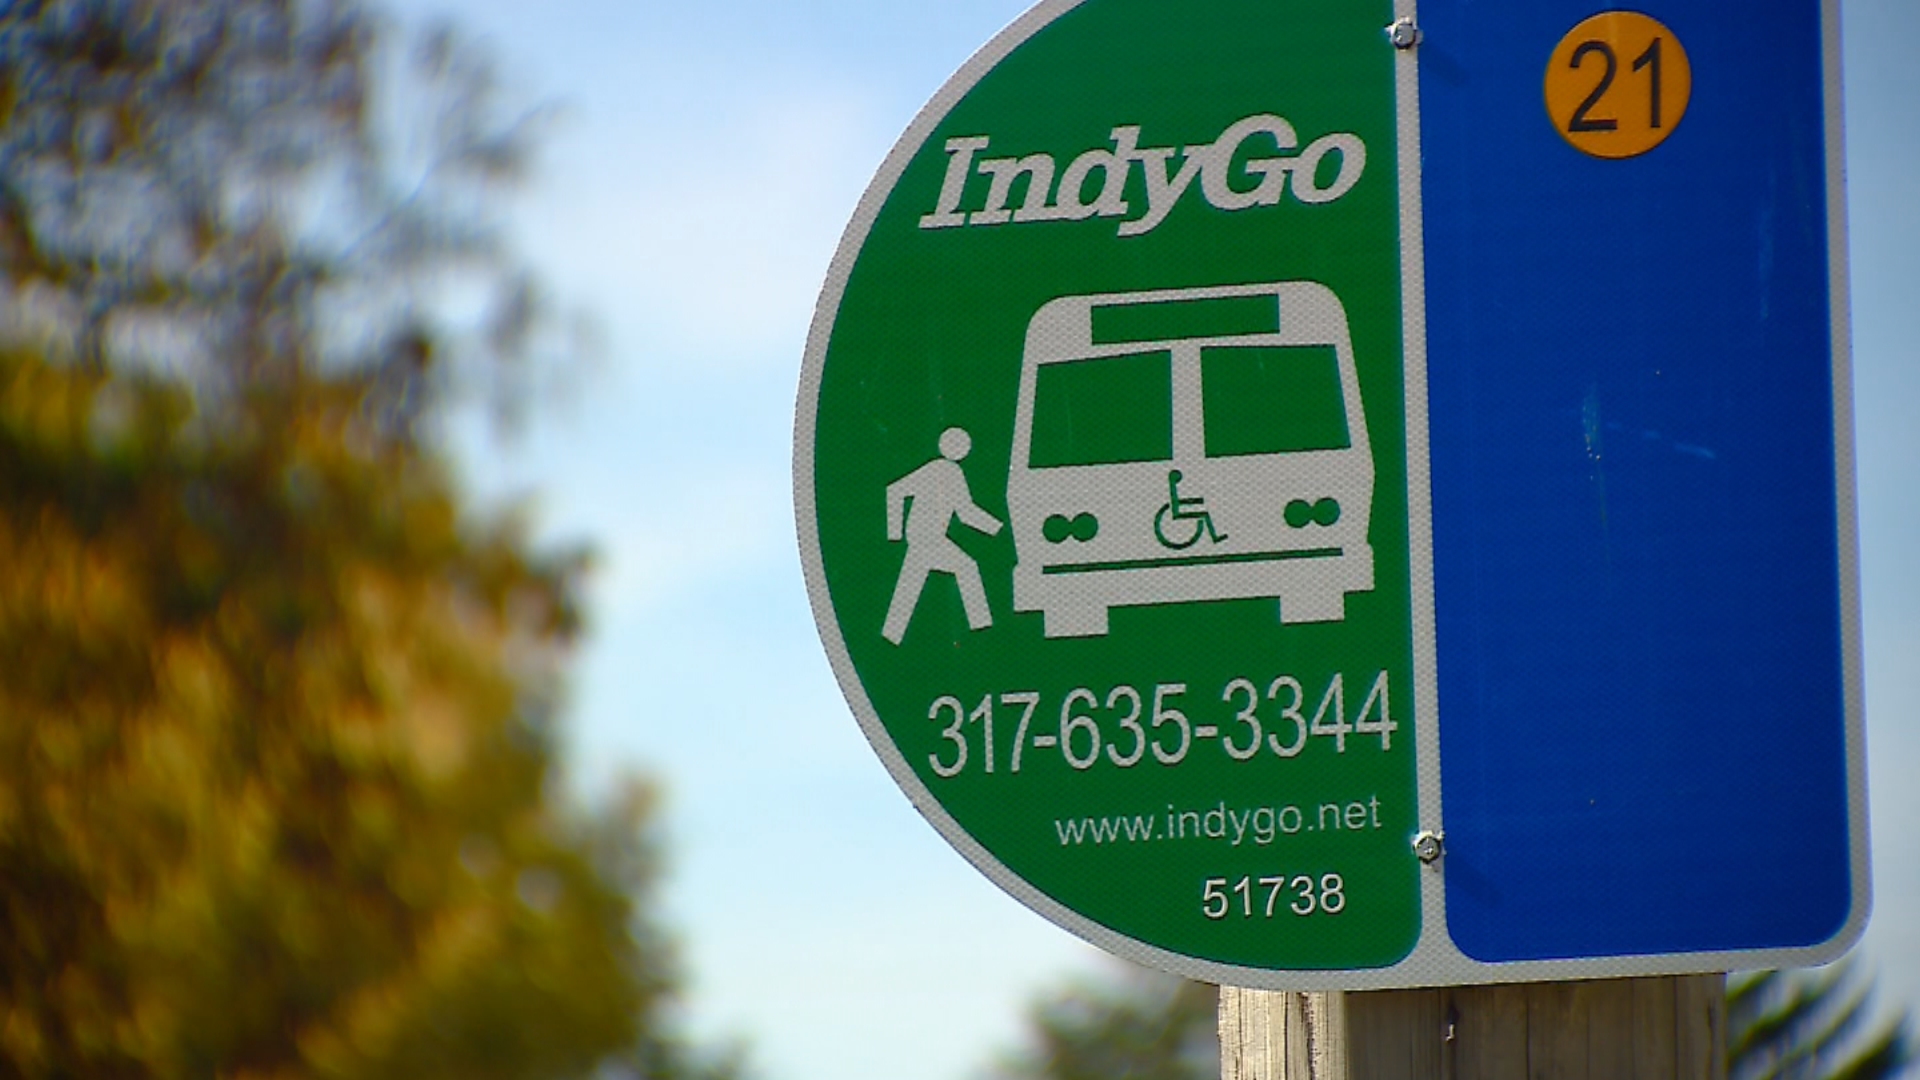 IndyGo announces upcoming changes to routes, schedules